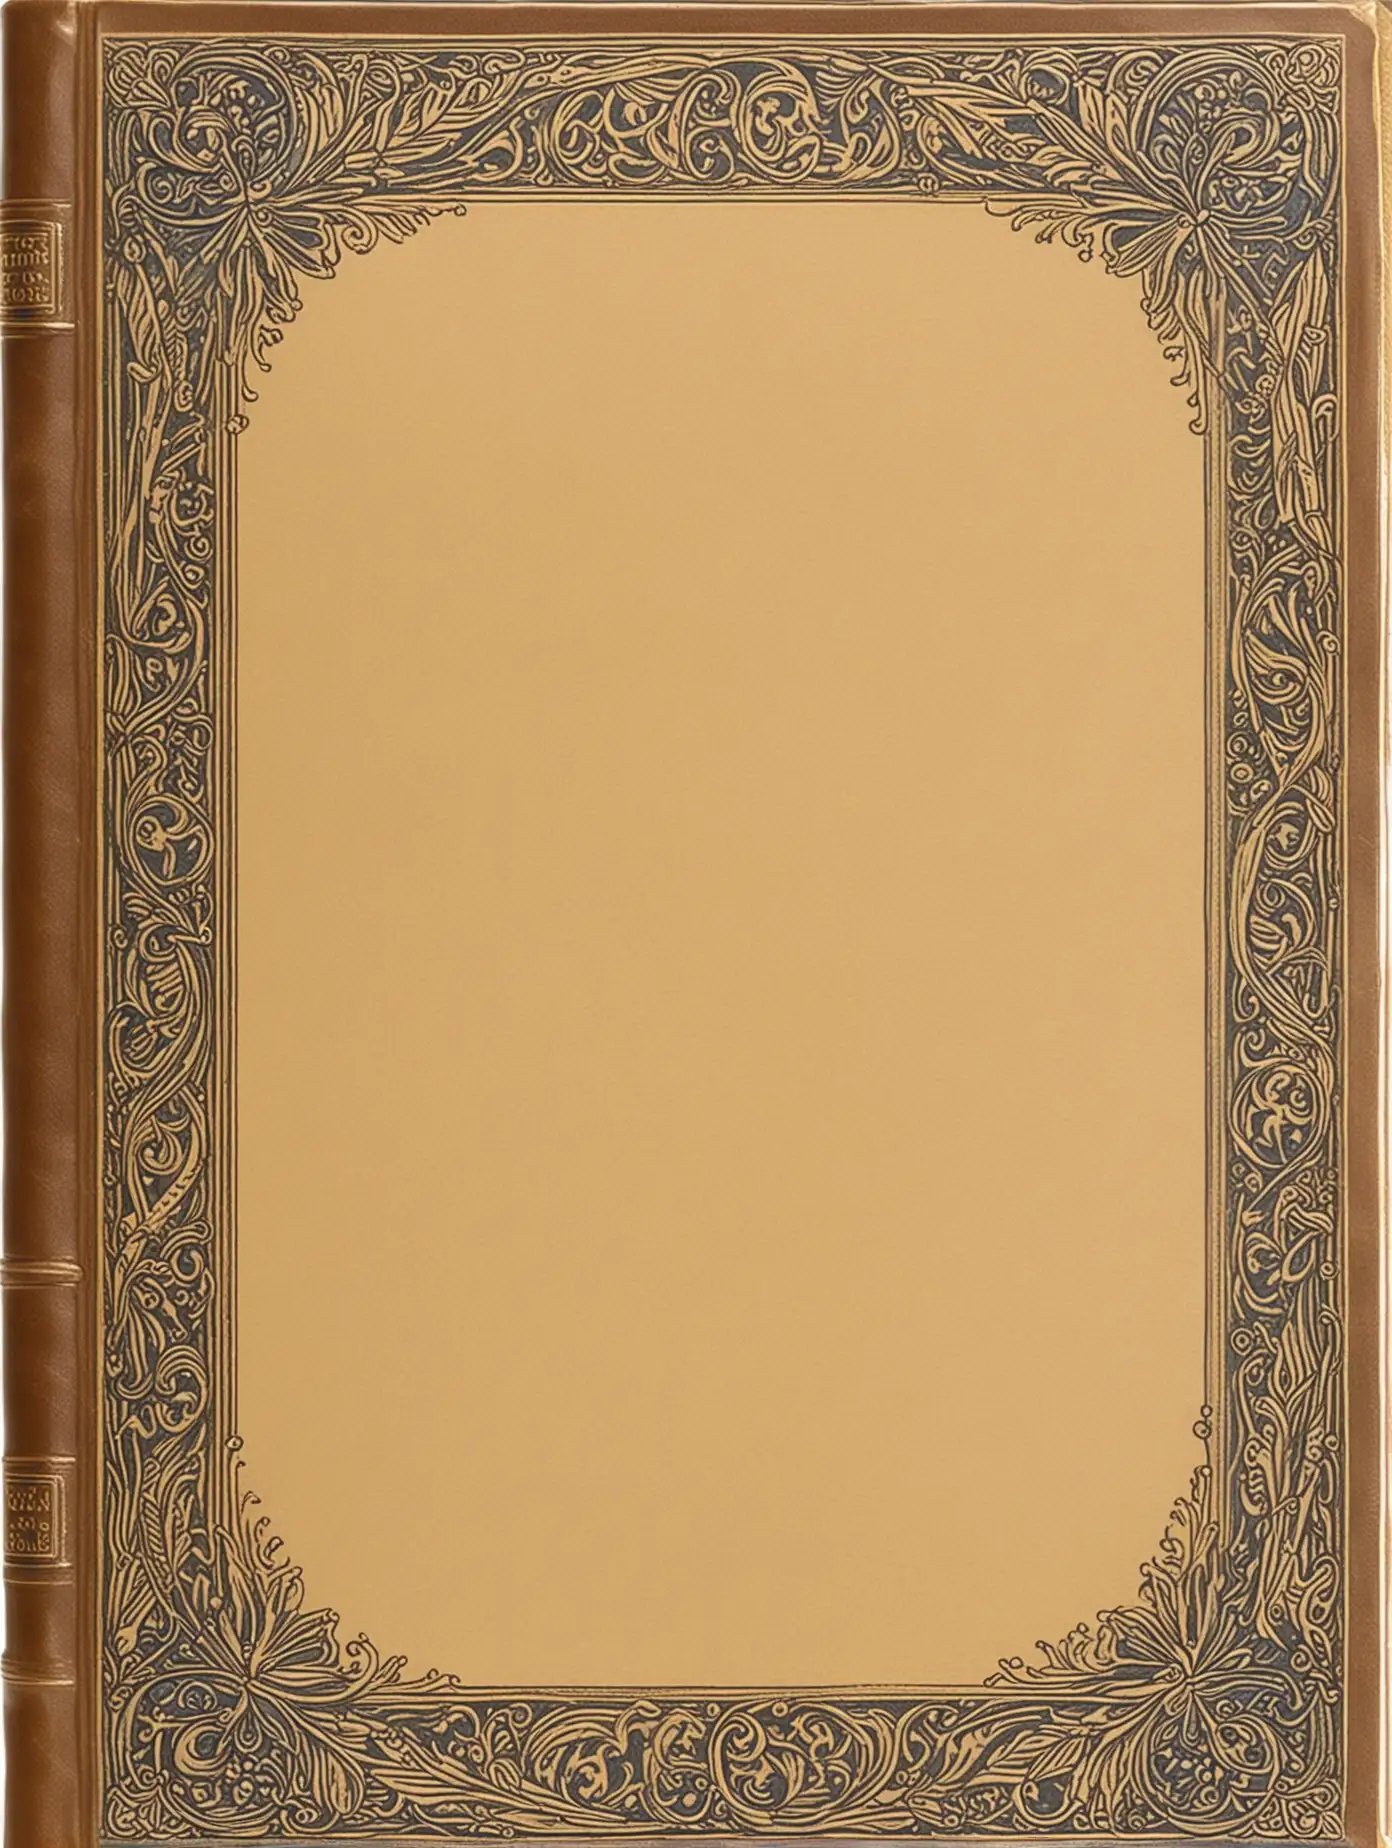 A blank book cover with a merlin border